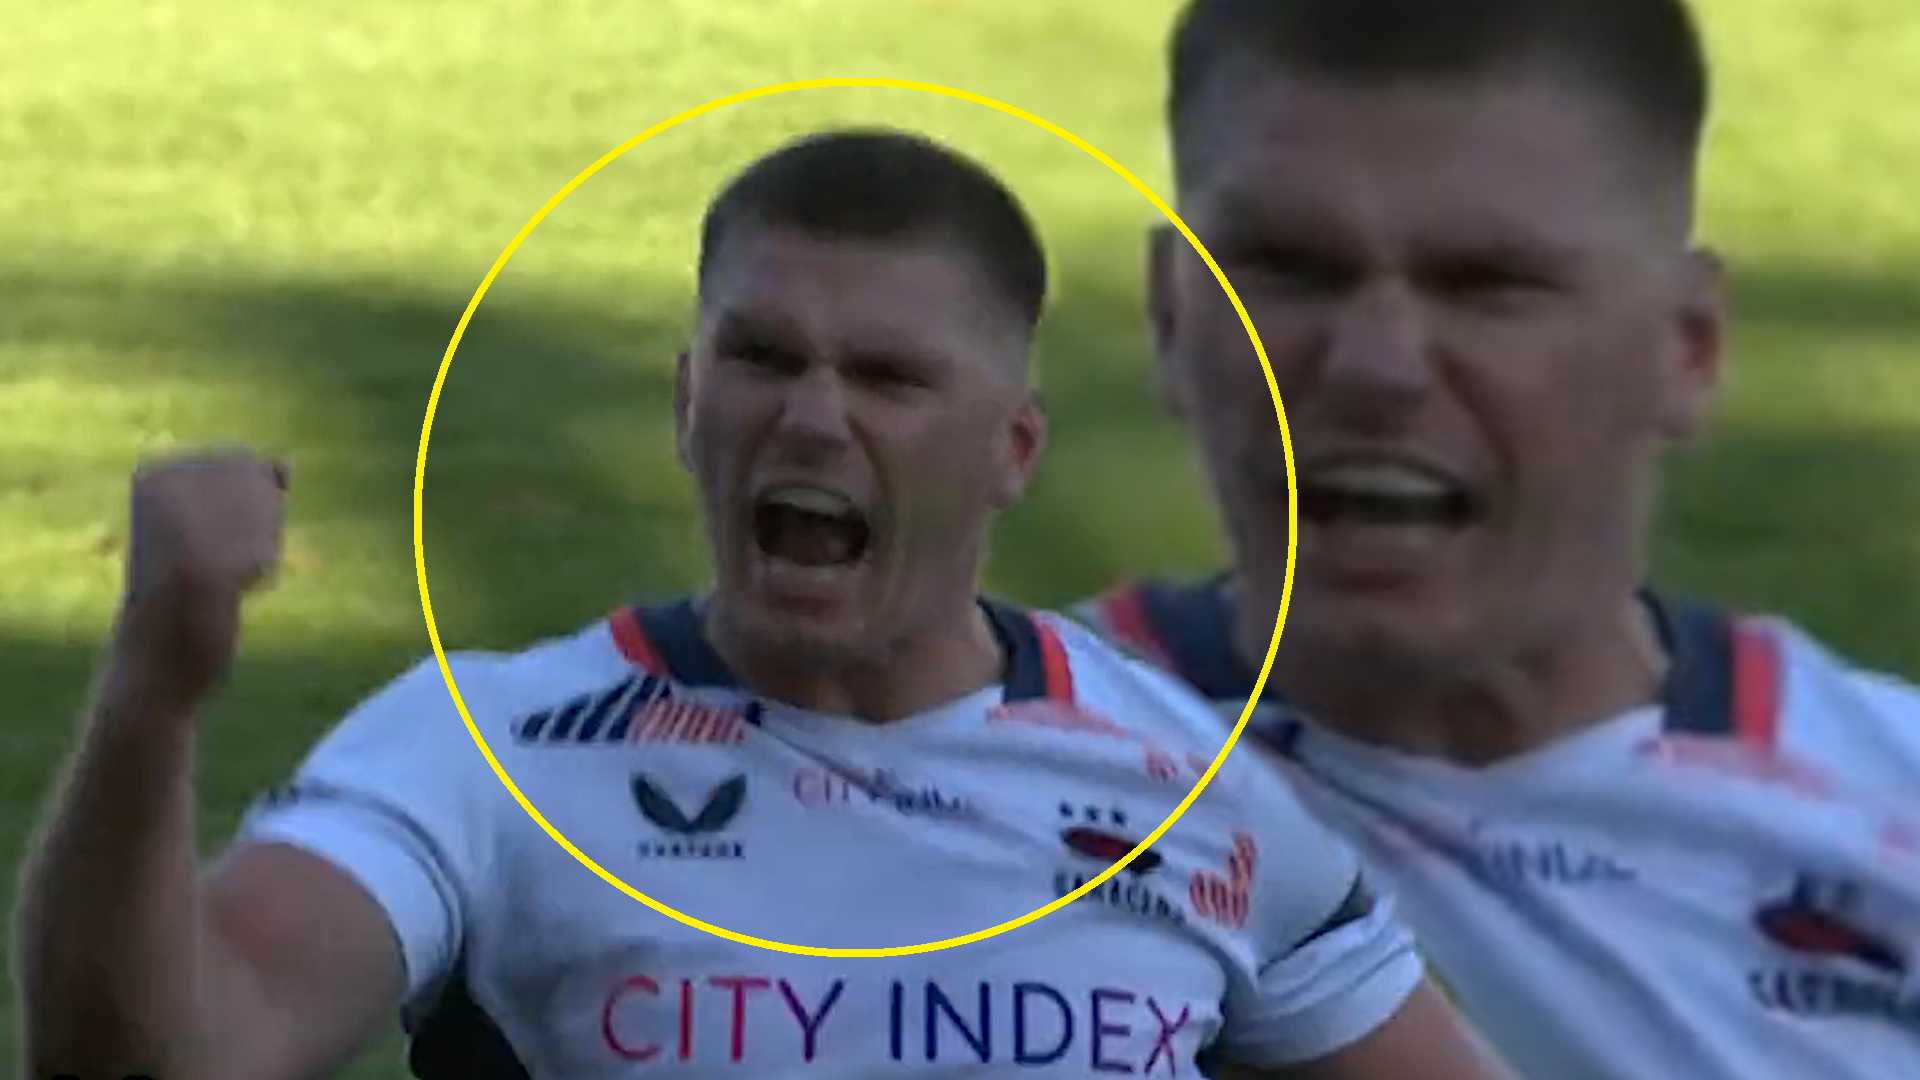 Owen Farrell in dock after saluting crowd in overly aggressively manner